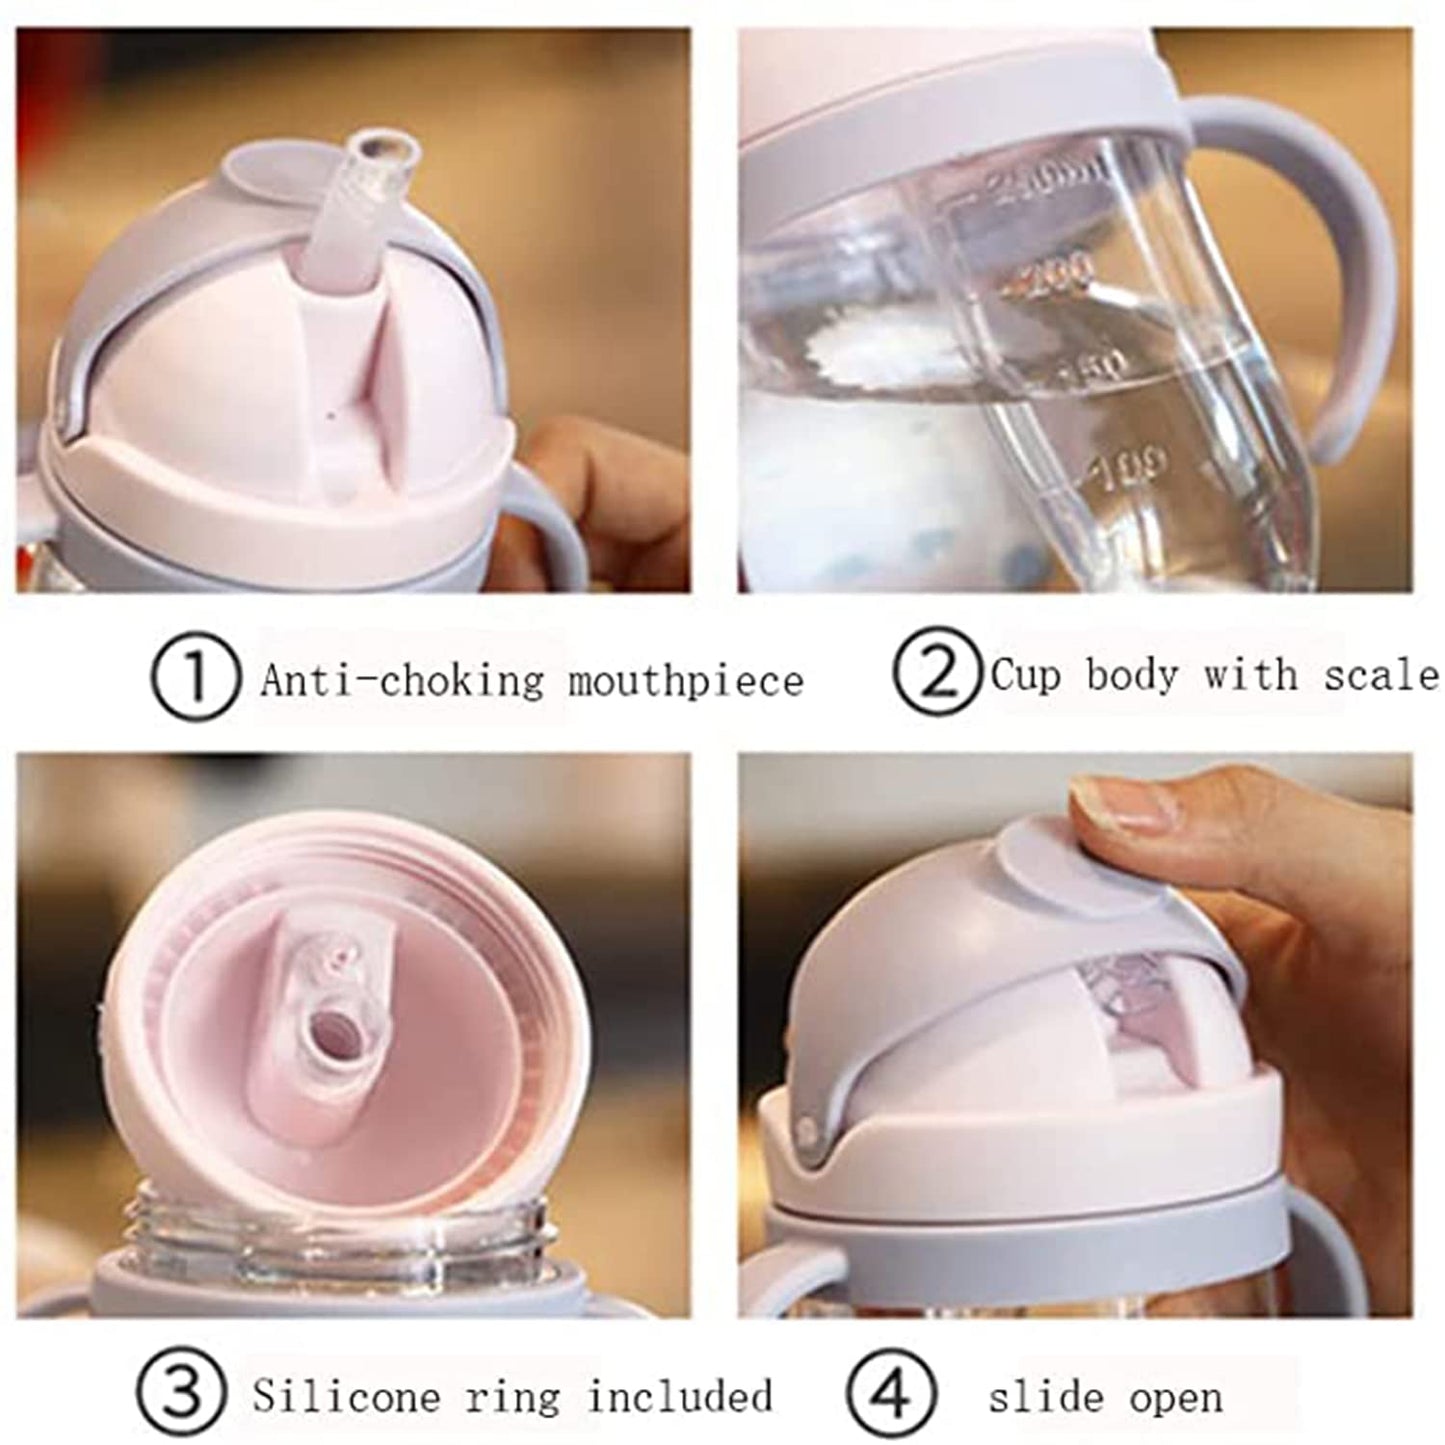 Sippy Cup for Baby, Sippy Cup for Baby more than 6 months, KASTWAVESpill-Proof Sippy Cup, Toddler Cup with Straw and Handle, Anti-drop, Anti-leakage, Anti-choking for Boys Girls Child ( 300ml )